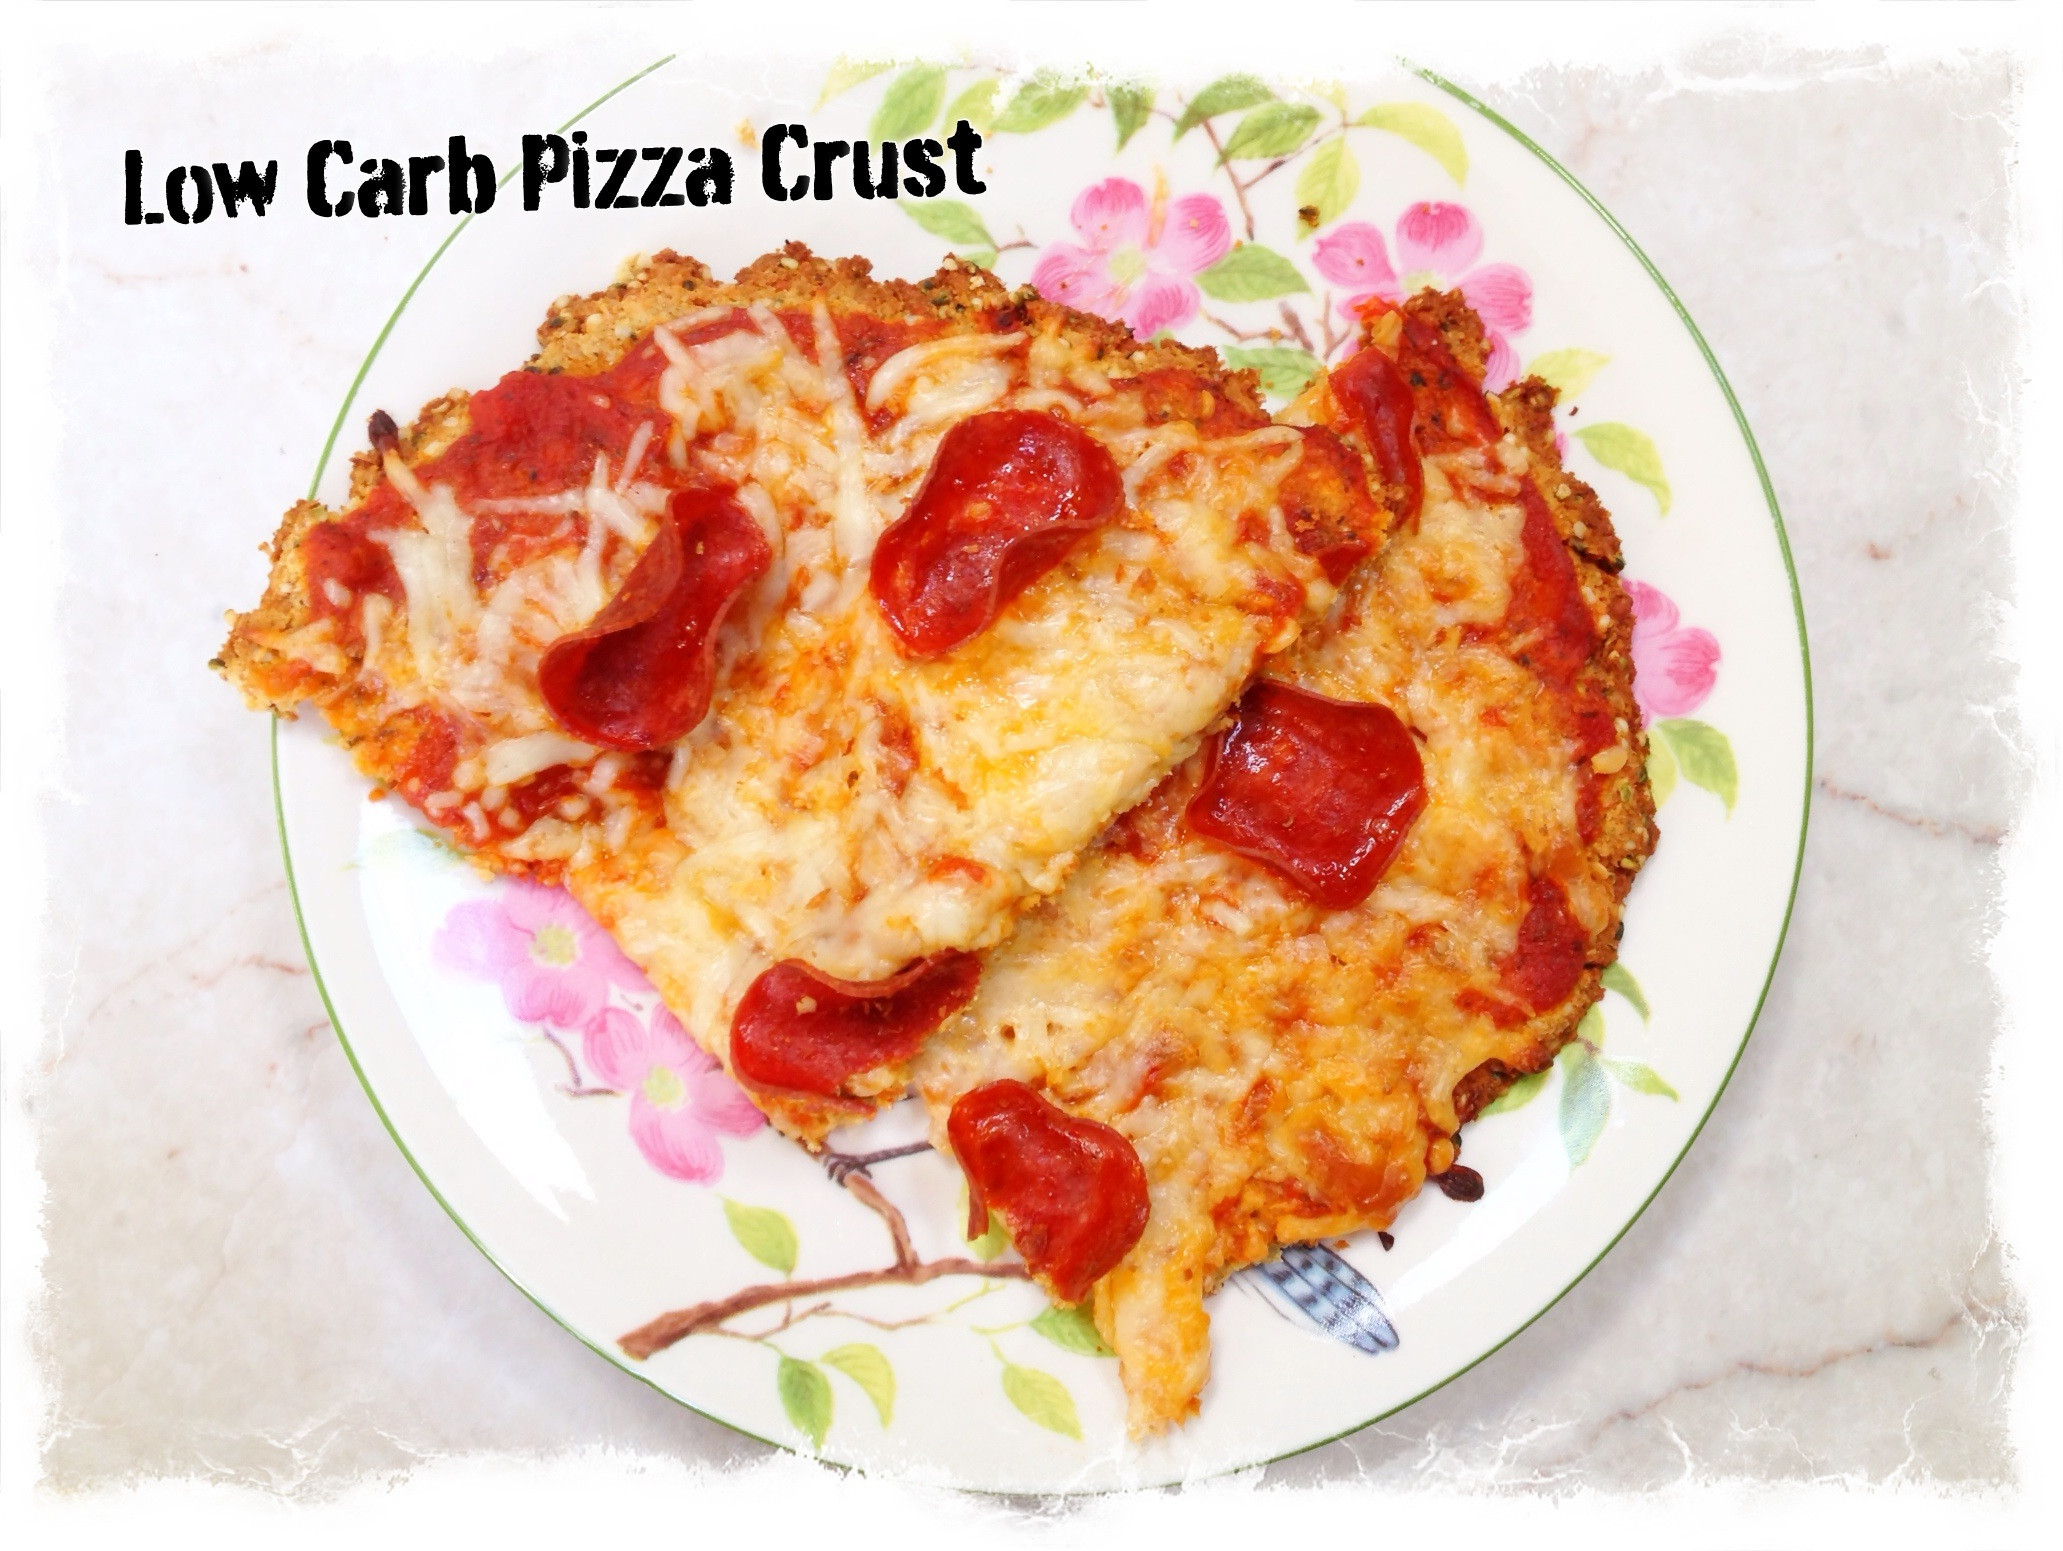 Low Carb Pizza Dough
 MLT Low Carb Pizza Crust My Life Cookbook